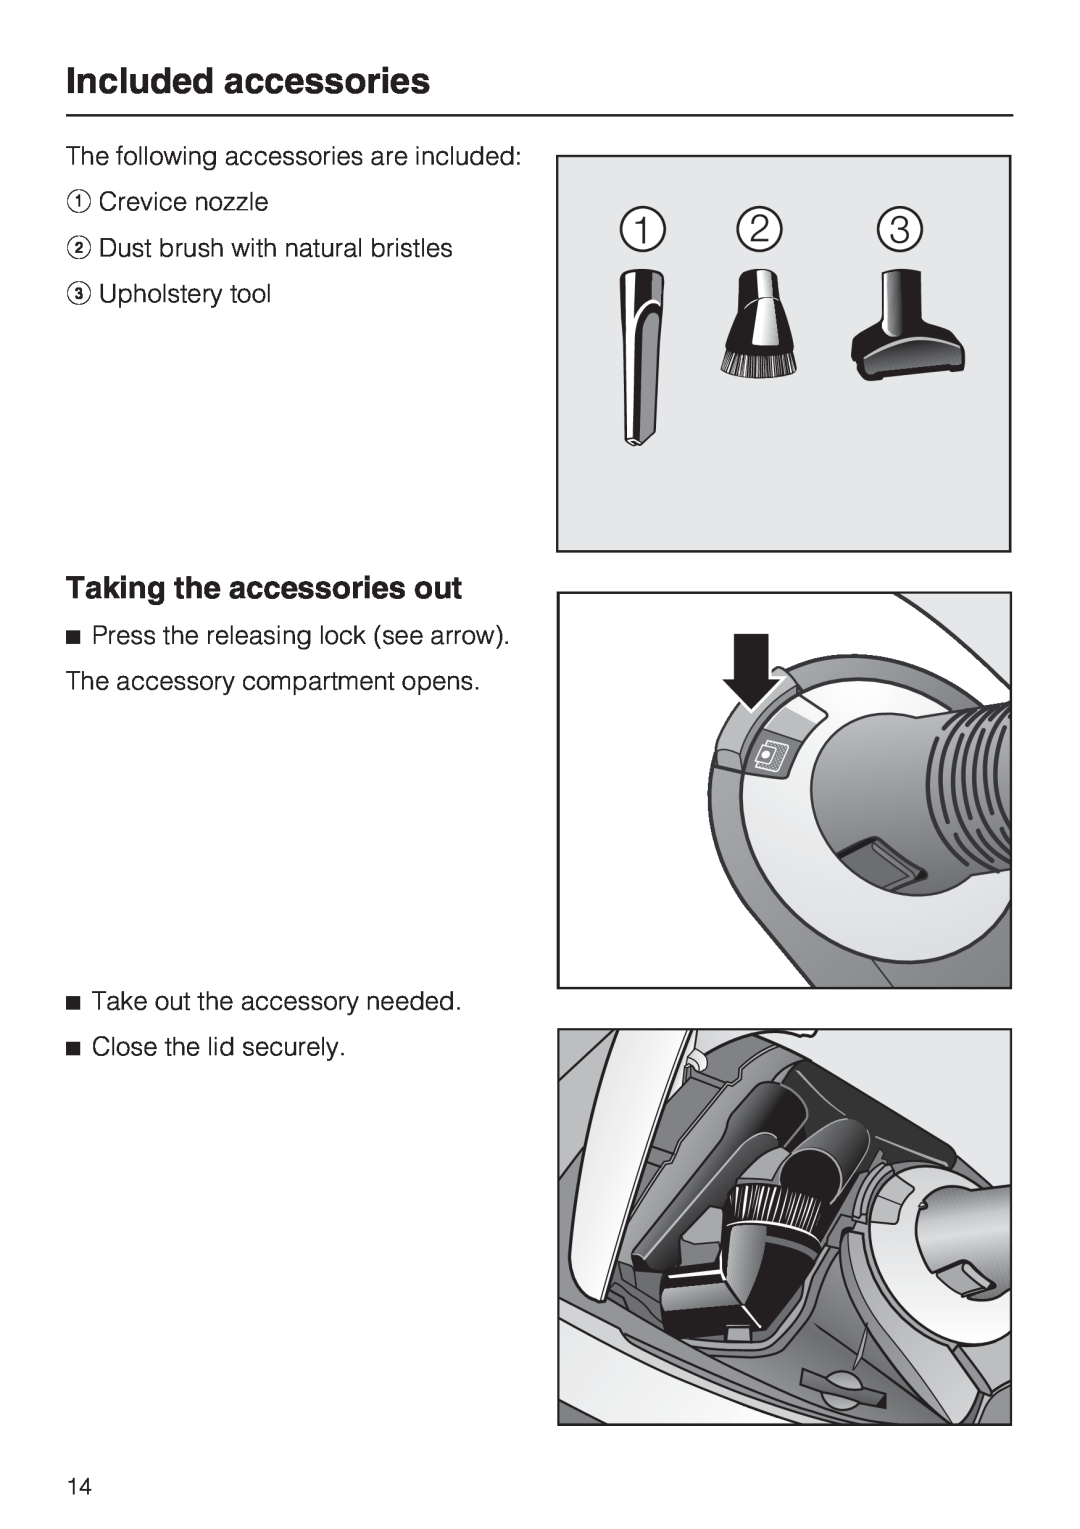 Miele S 5980 operating instructions Included accessories, Taking the accessories out 